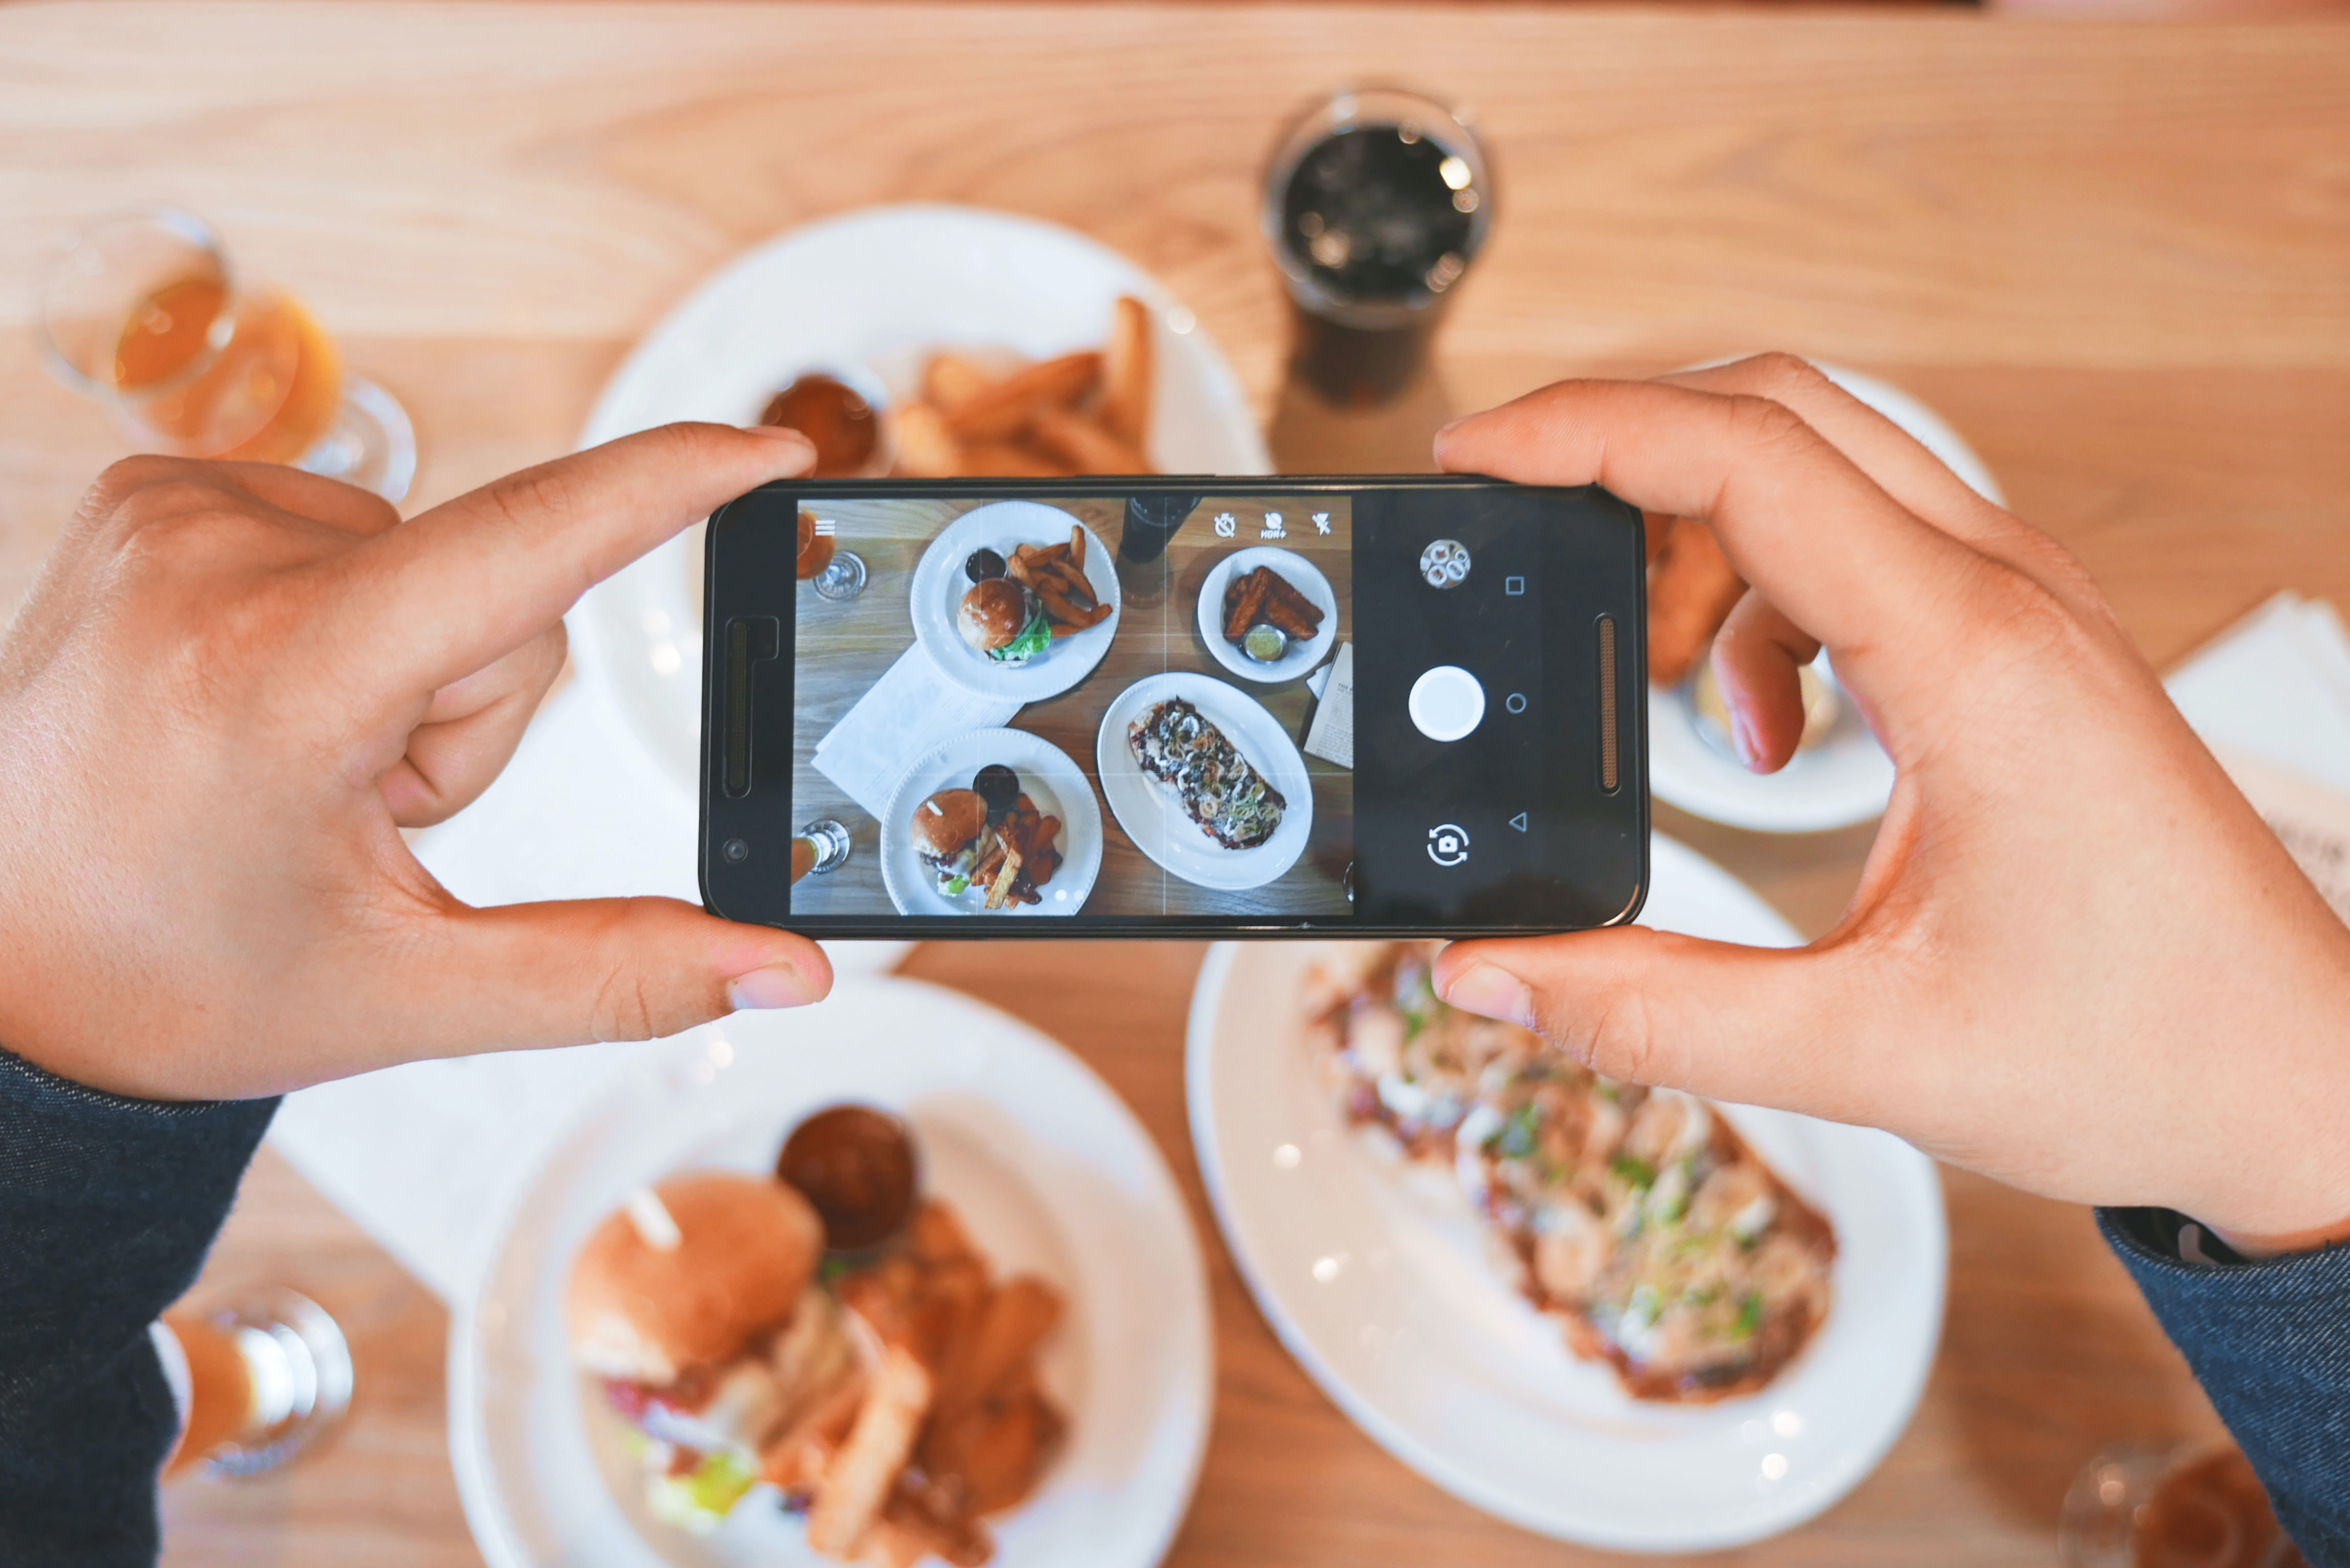 user generated content: food pics